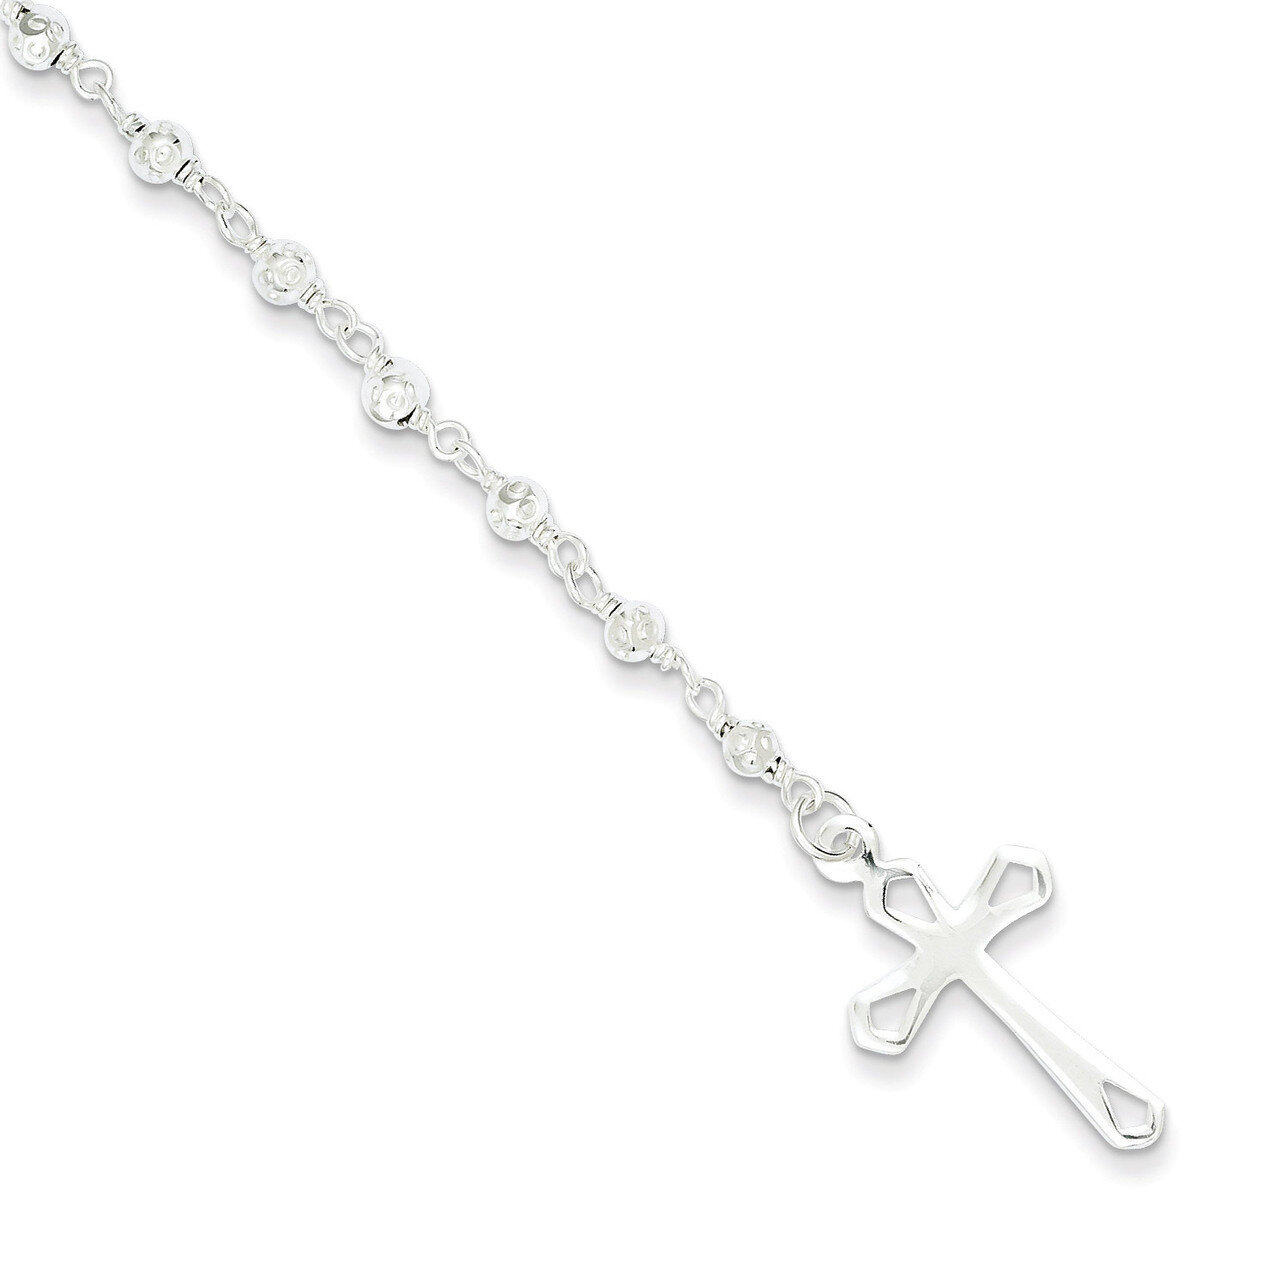 7.5 Inch Rosary Bracelet Sterling Silver Polished QH4697-7.5